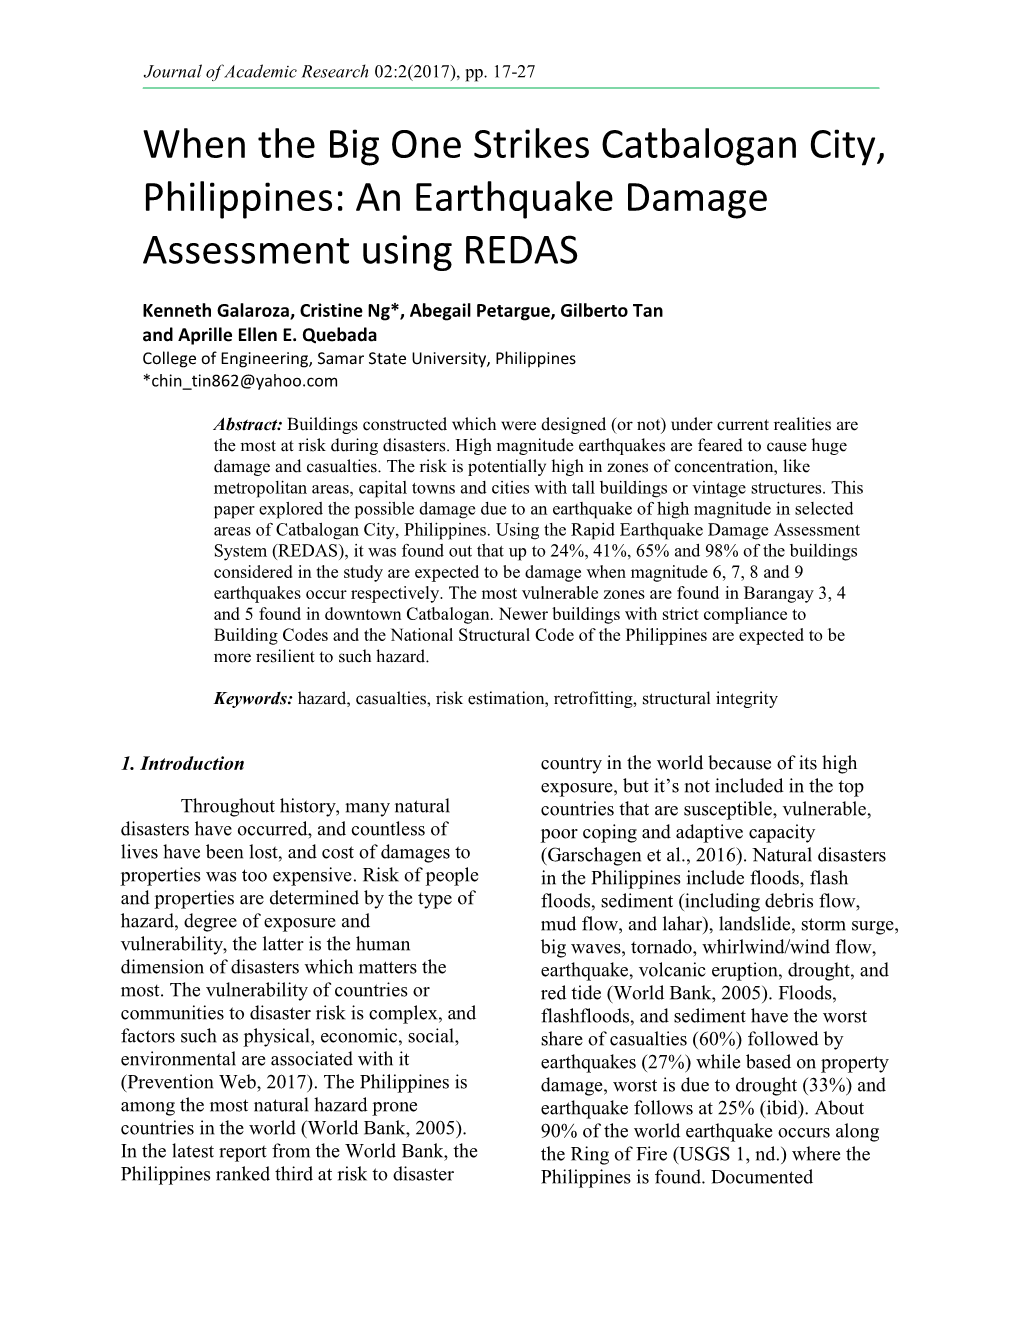 When the Big One Strikes Catbalogan City, Philippines: an Earthquake Damage Assessment Using REDAS